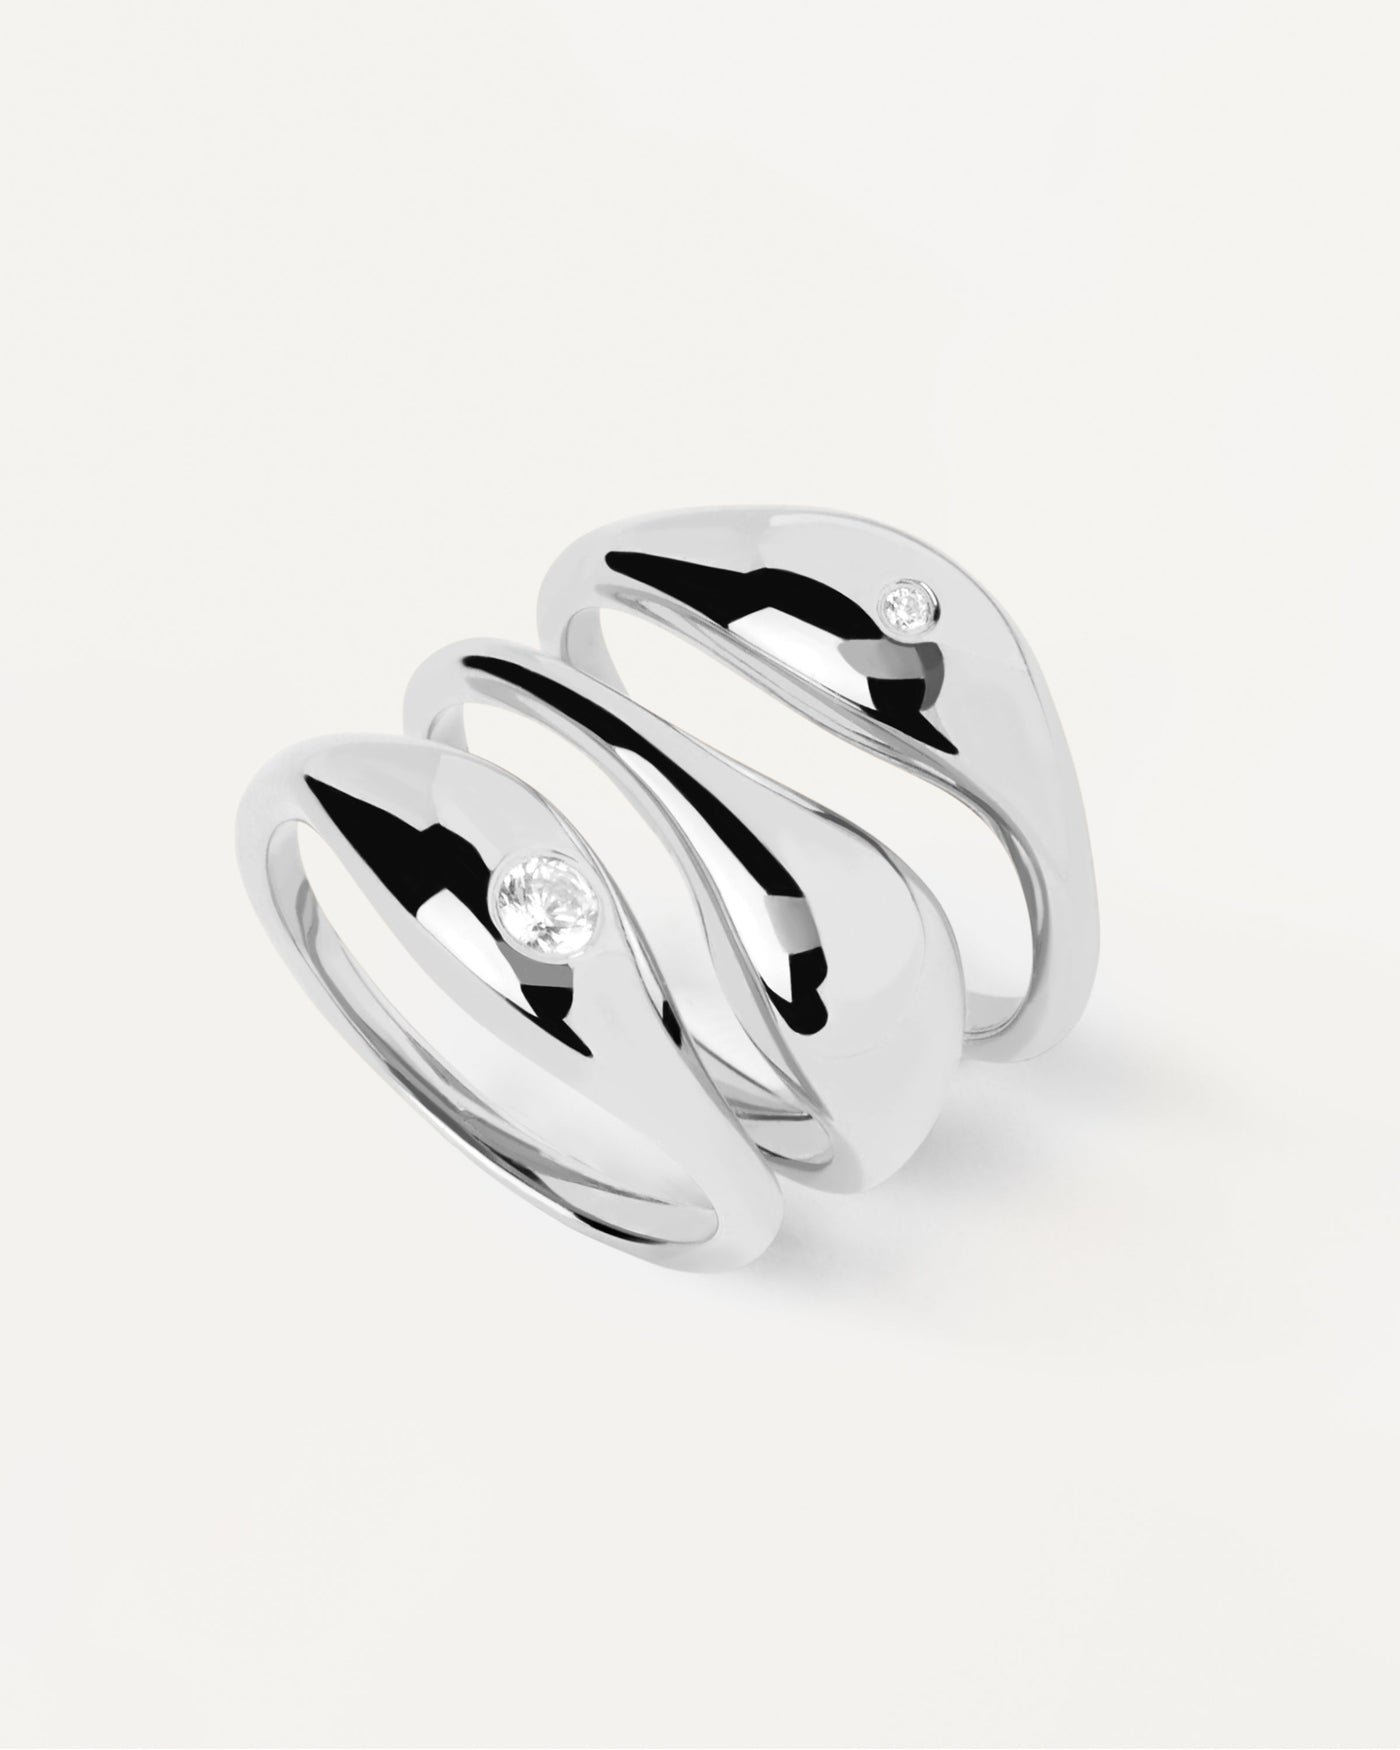 2023 Selection | Sugar Silver Ring Set. Sterling silver set of three rings with white zirconia. Get the latest arrival from PDPAOLA. Place your order safely and get this Best Seller. Free Shipping.